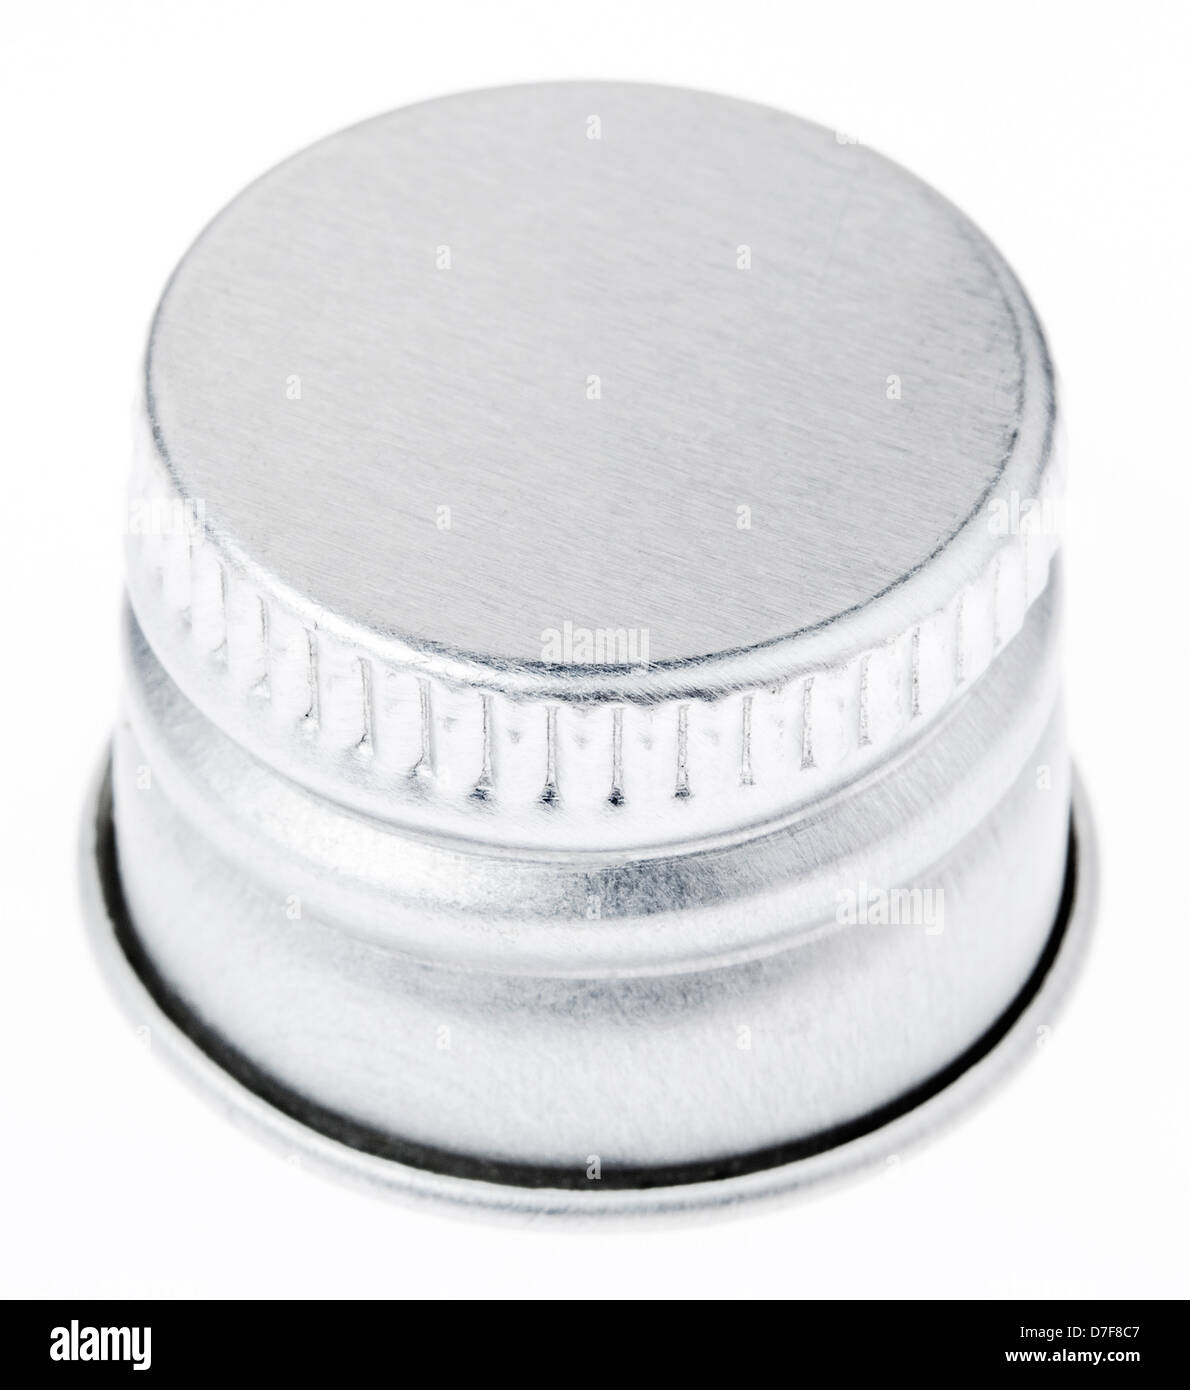 Silver colored aluminum cap, Shot from a slightly high angle. Isolated on white background. Stock Photo